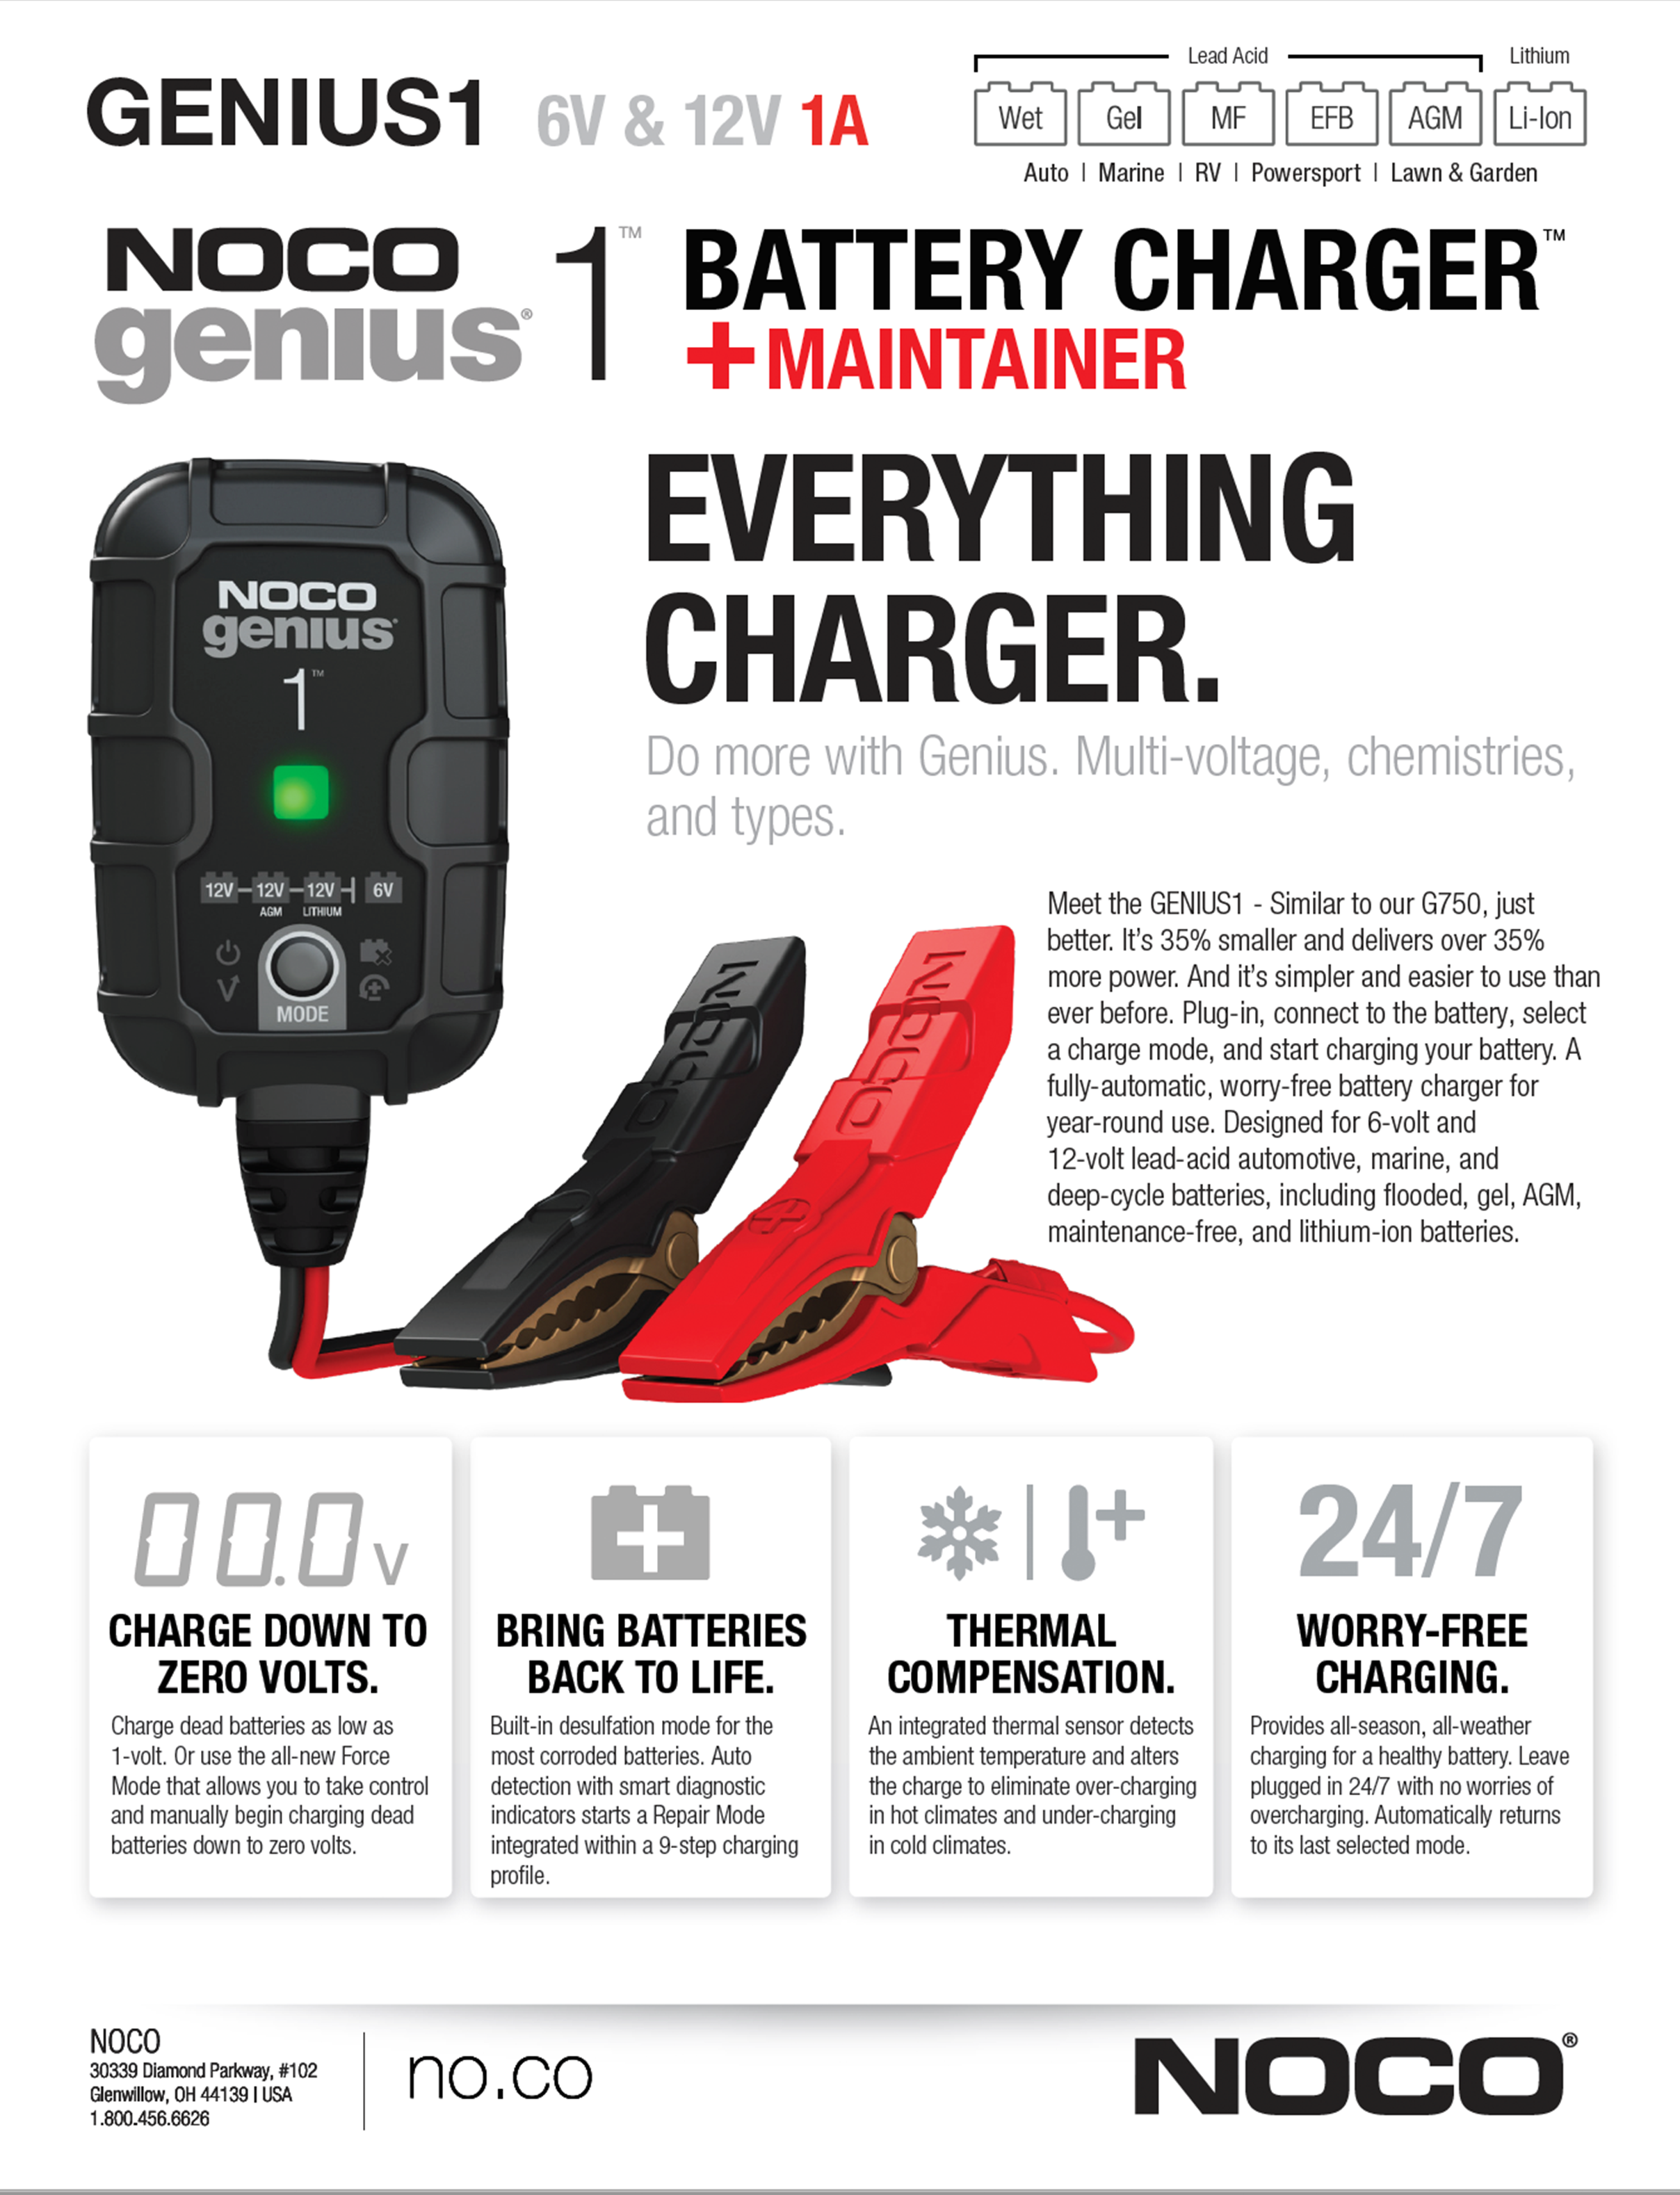 NOCO Genius1 Smart Battery Charger and Maintainer 6/12 Volt 1 Amp